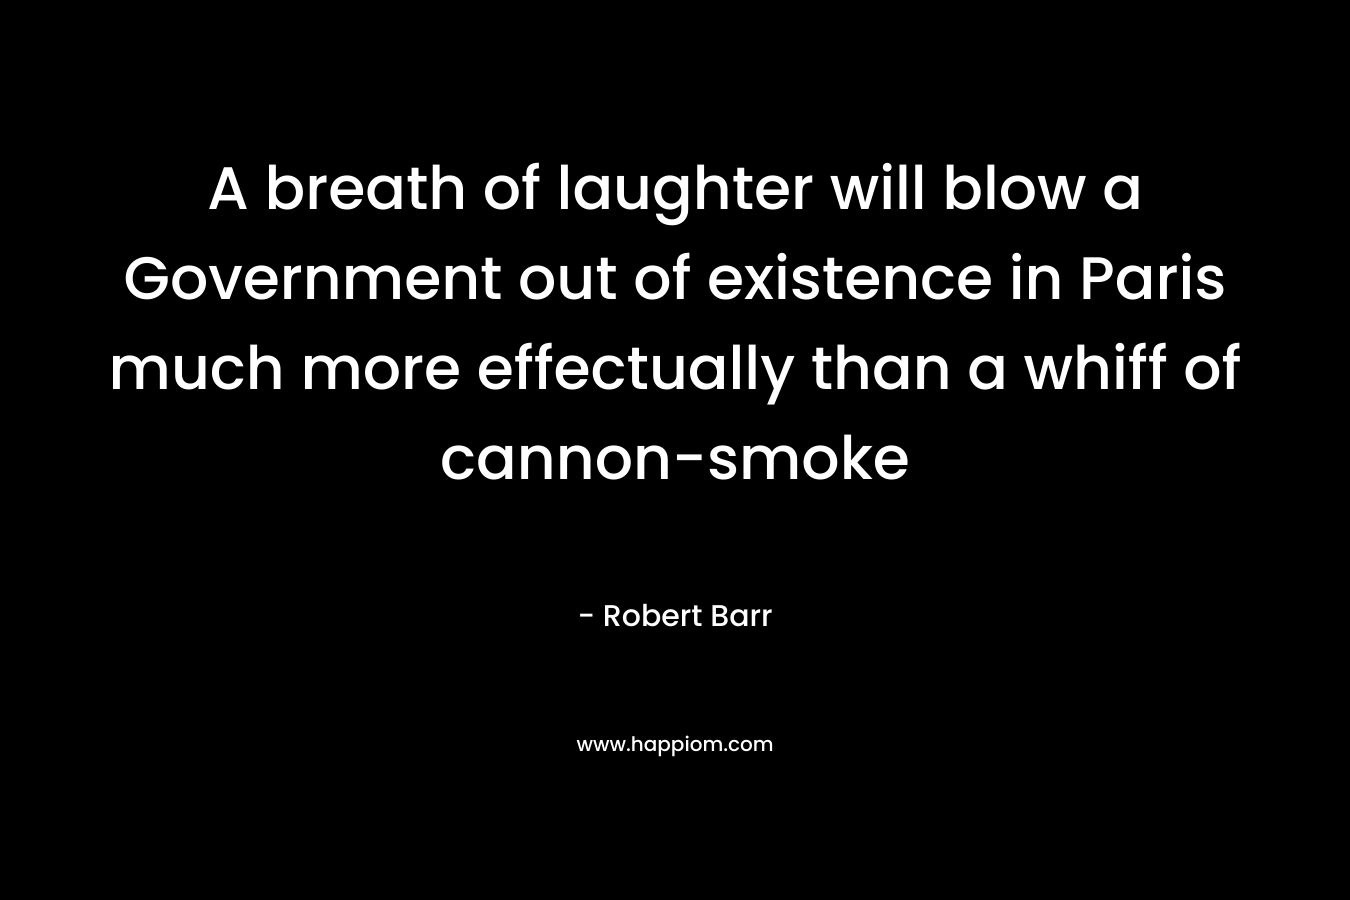 A breath of laughter will blow a Government out of existence in Paris much more effectually than a whiff of cannon-smoke – Robert Barr